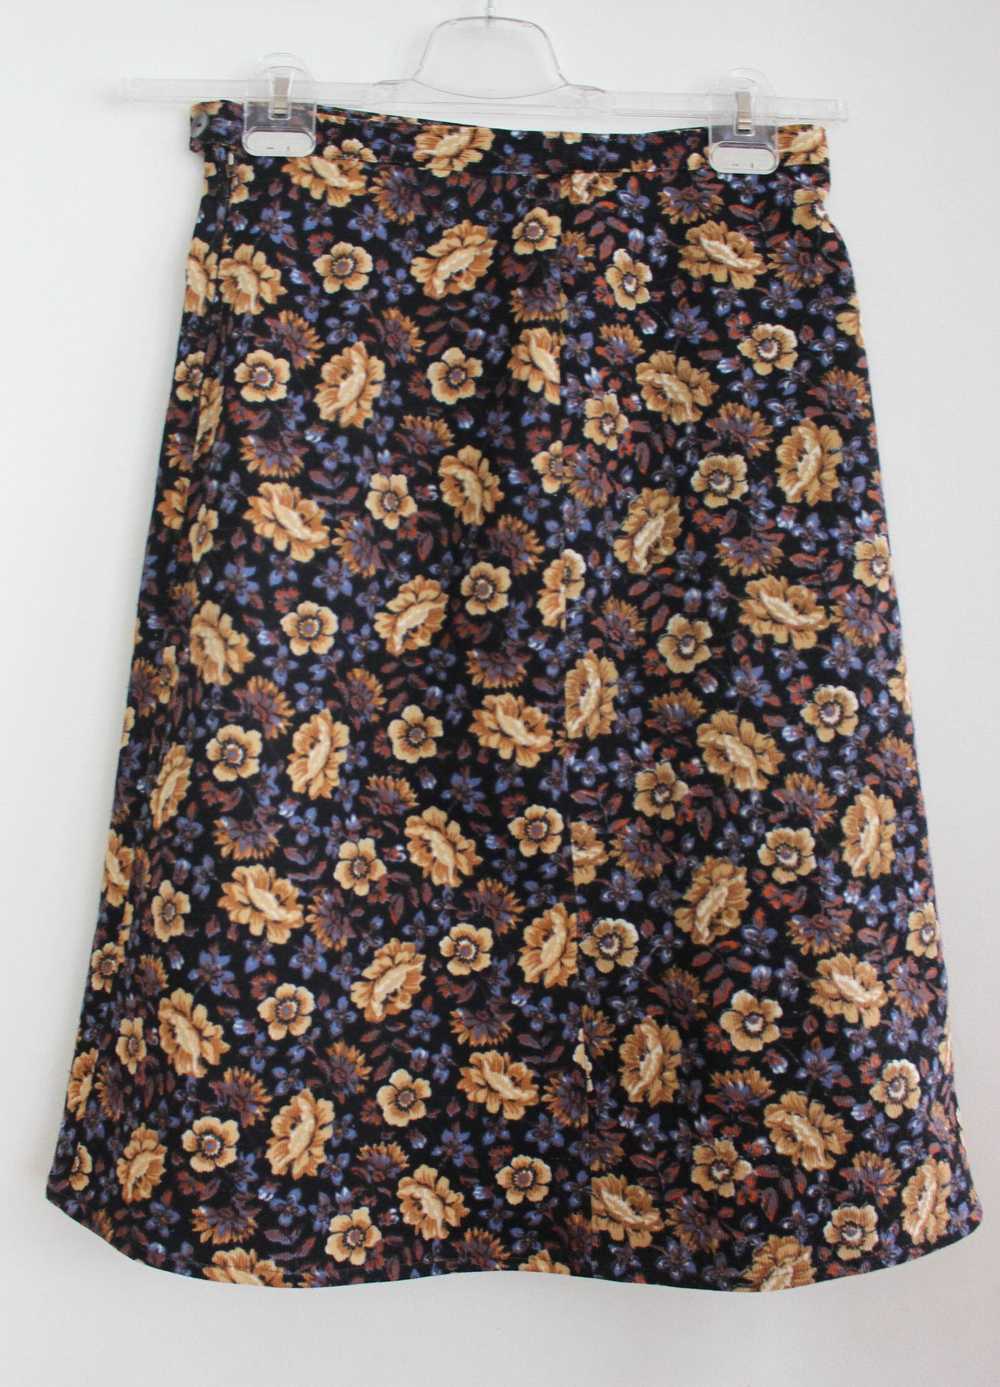 Corduroy skirt - Floral skirt in finely corduroy,… - image 4